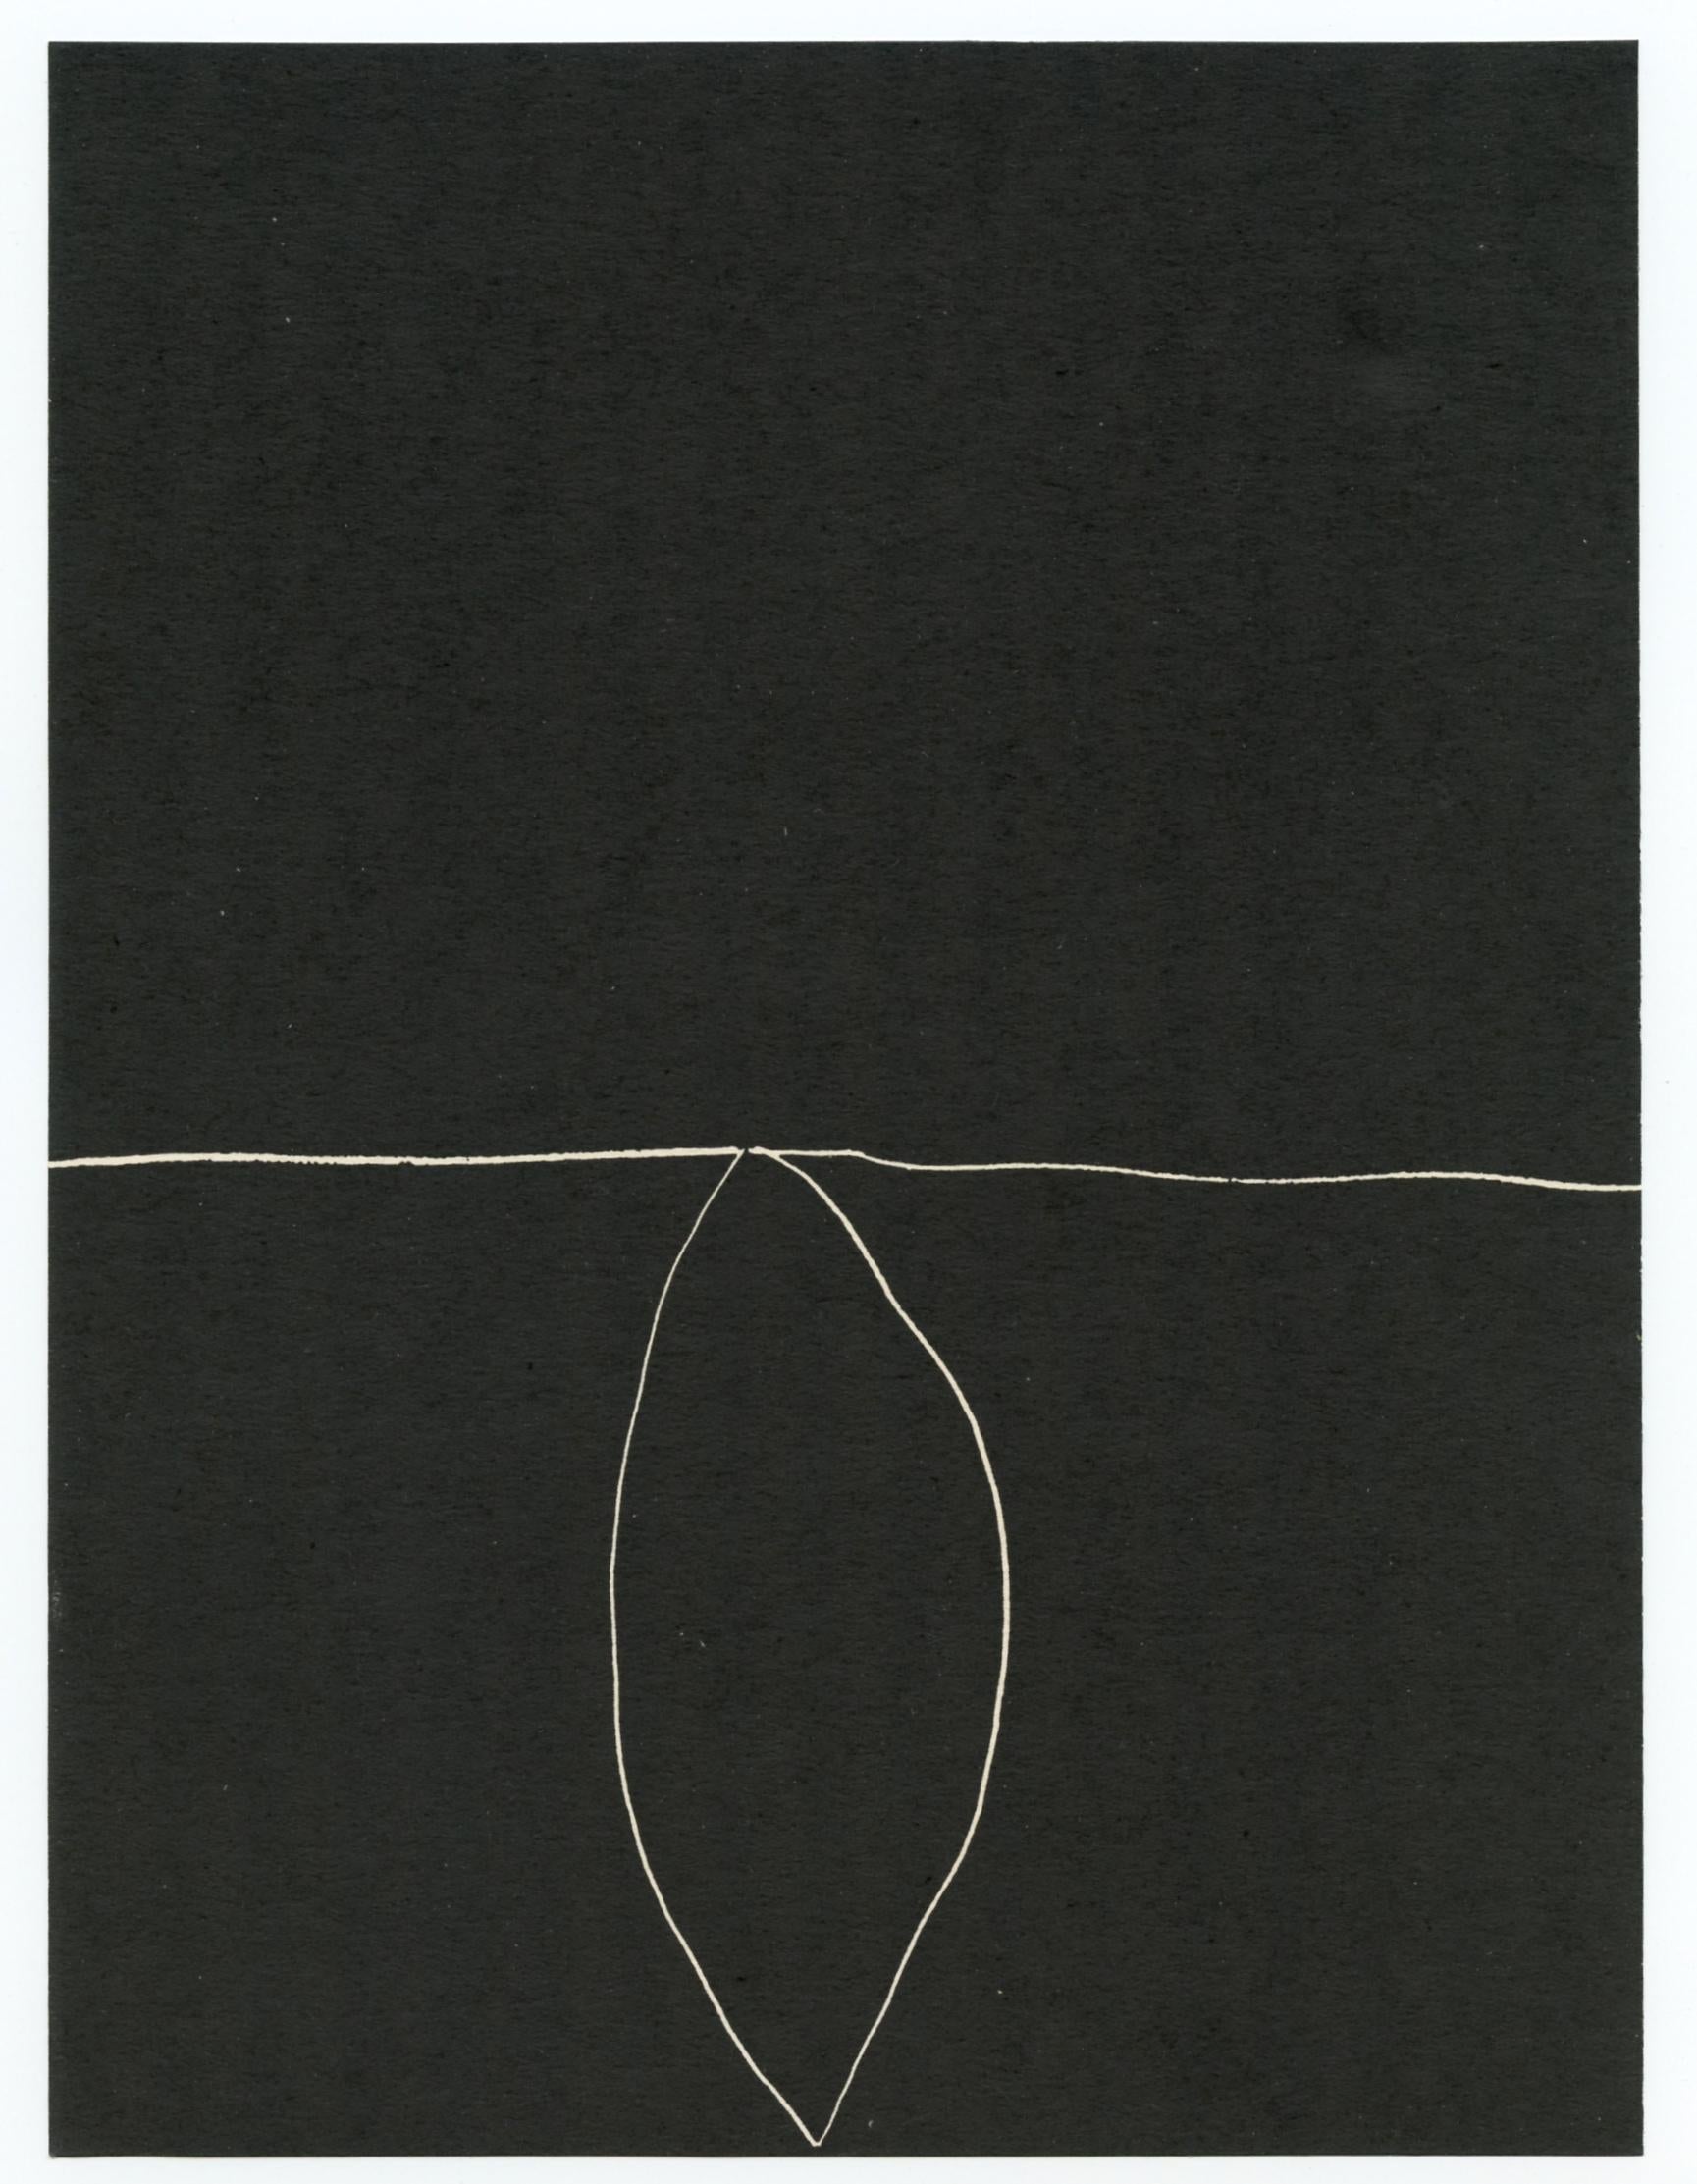 lithograph - Print by (after) Ellsworth Kelly